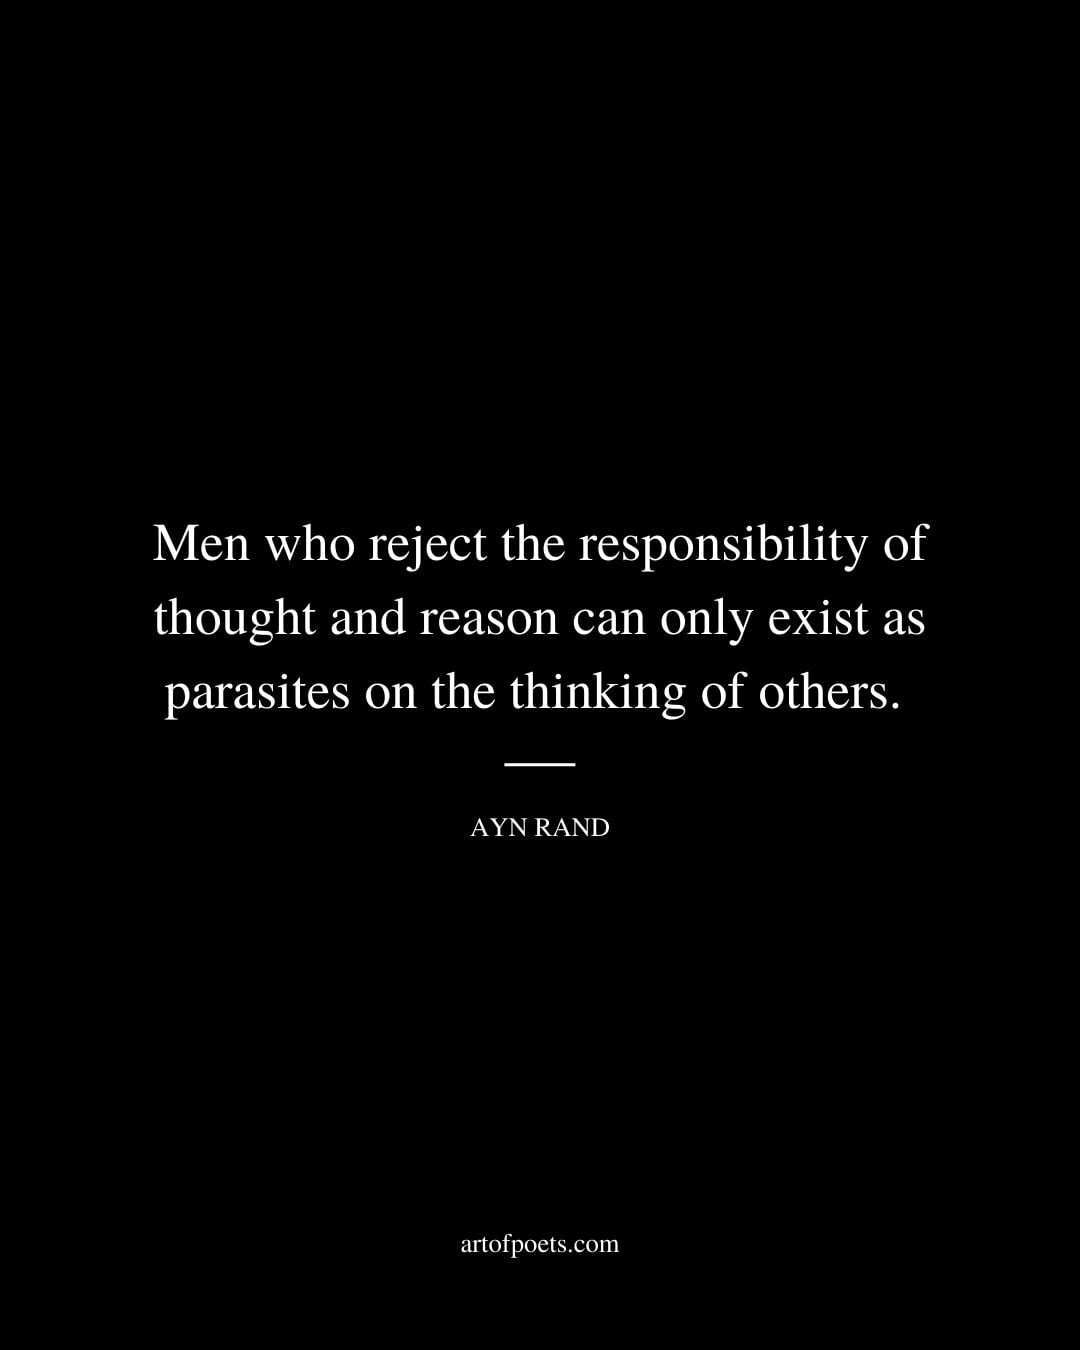 Men who reject the responsibility of thought and reason can only exist as parasites on the thinking of others